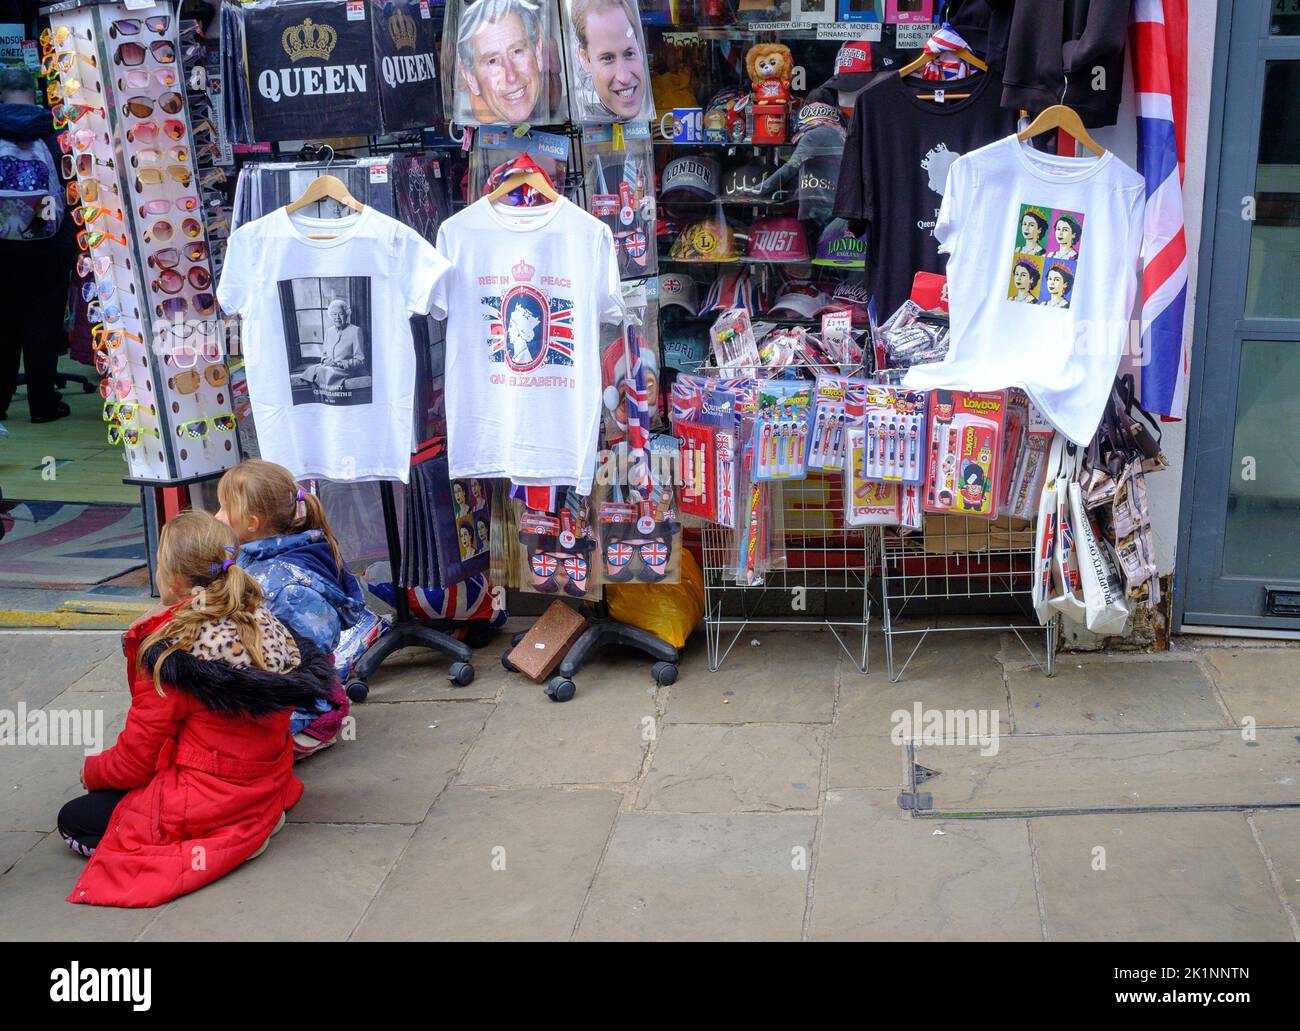 Two children sit outside a shop in Windsor selling royal memorabilia. T-shirts on display. Children with backs to camera. Stock Photo